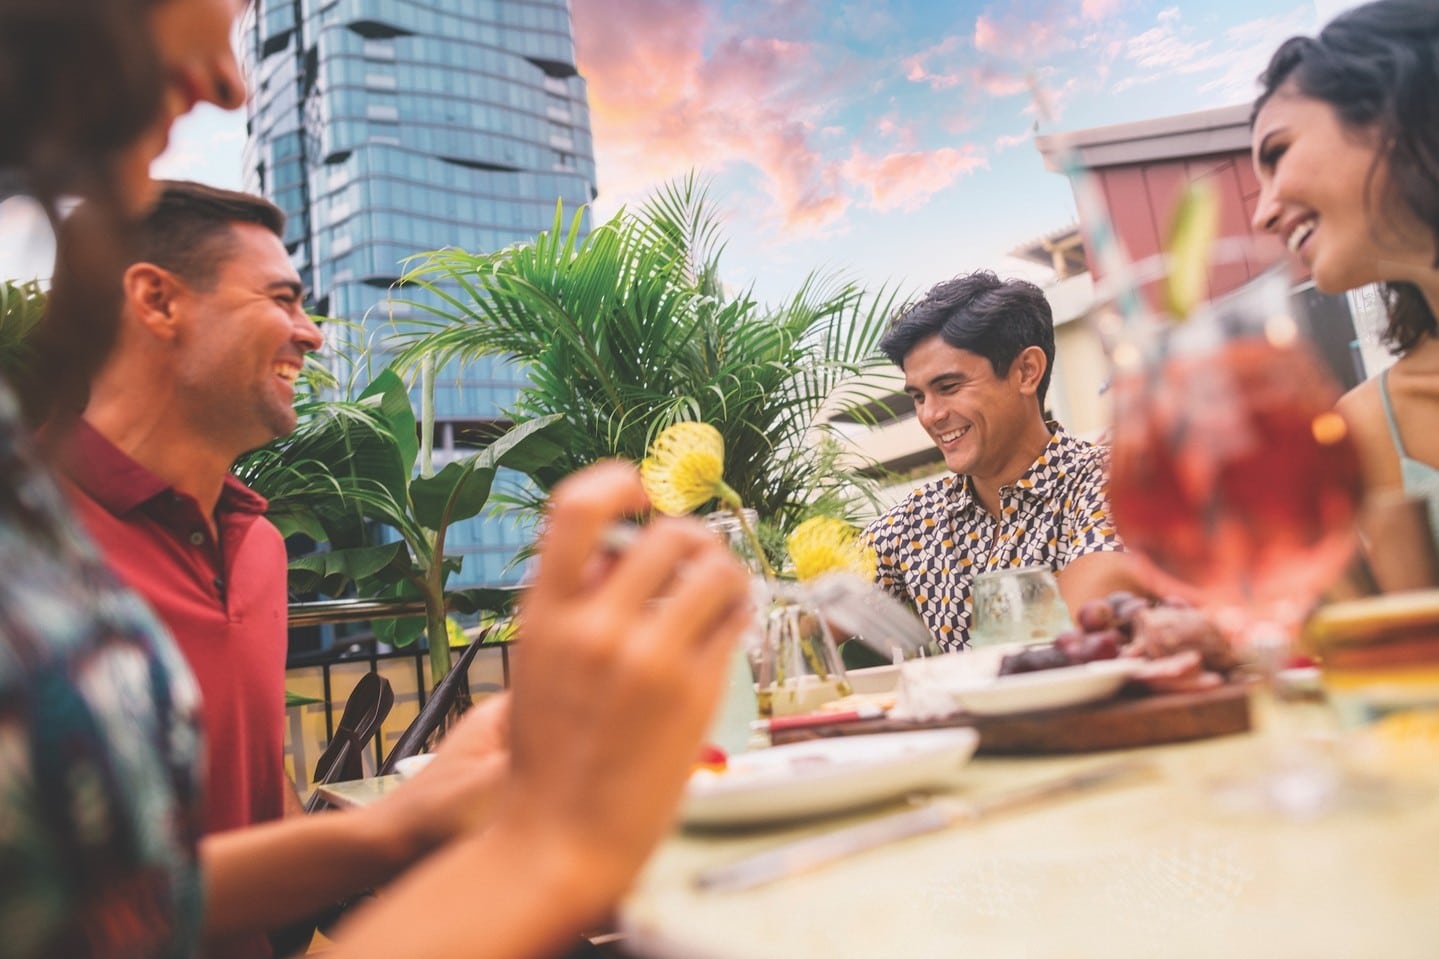 Celebrate spring with a meal alfresco! Enjoy a South Shore sunset at a variety of eateries and cafés in the neighborhood.